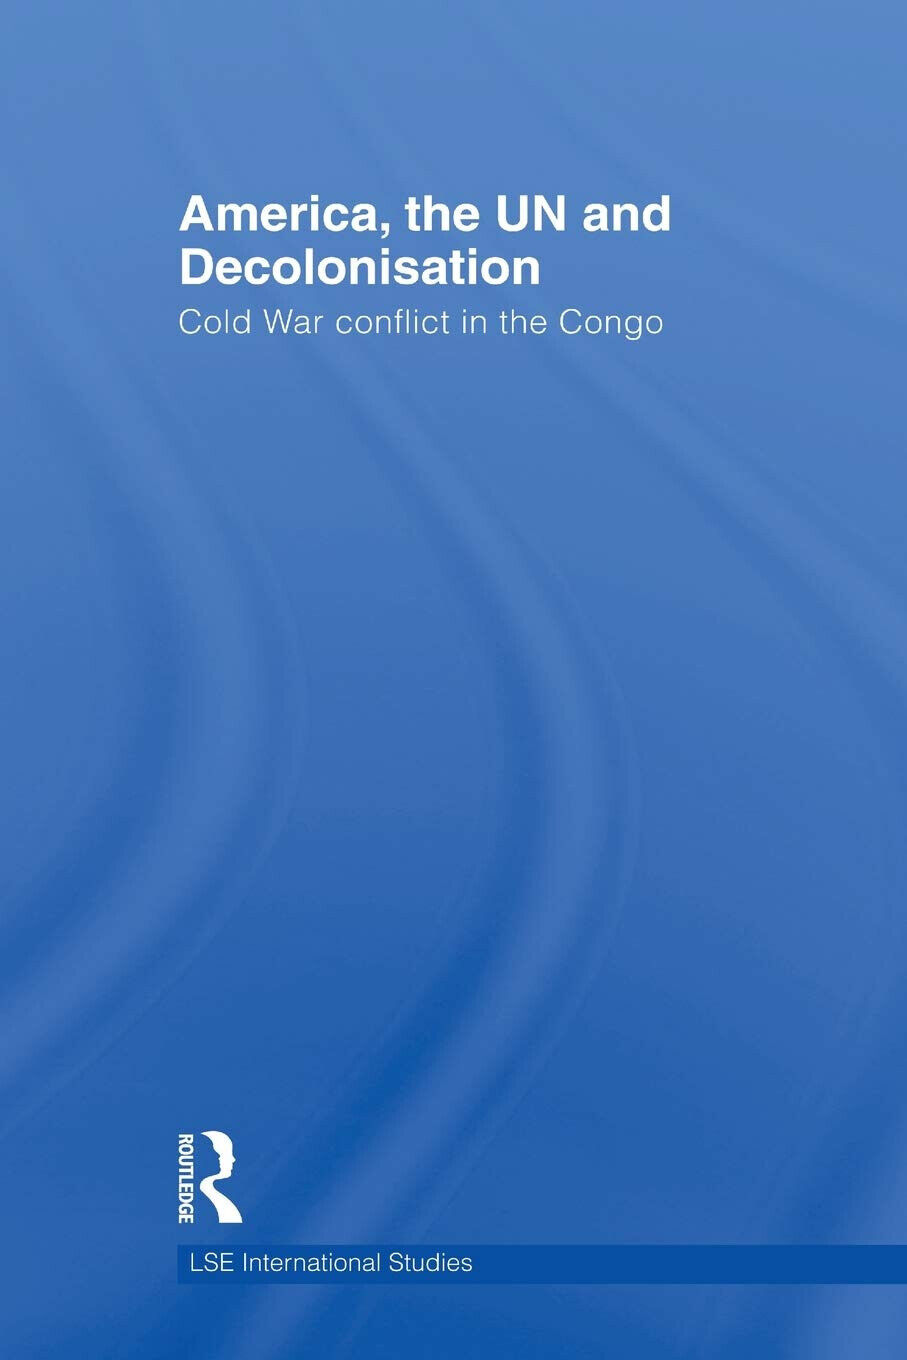 America, the UN and Decolonisation - John Kent - Routledge, 2011